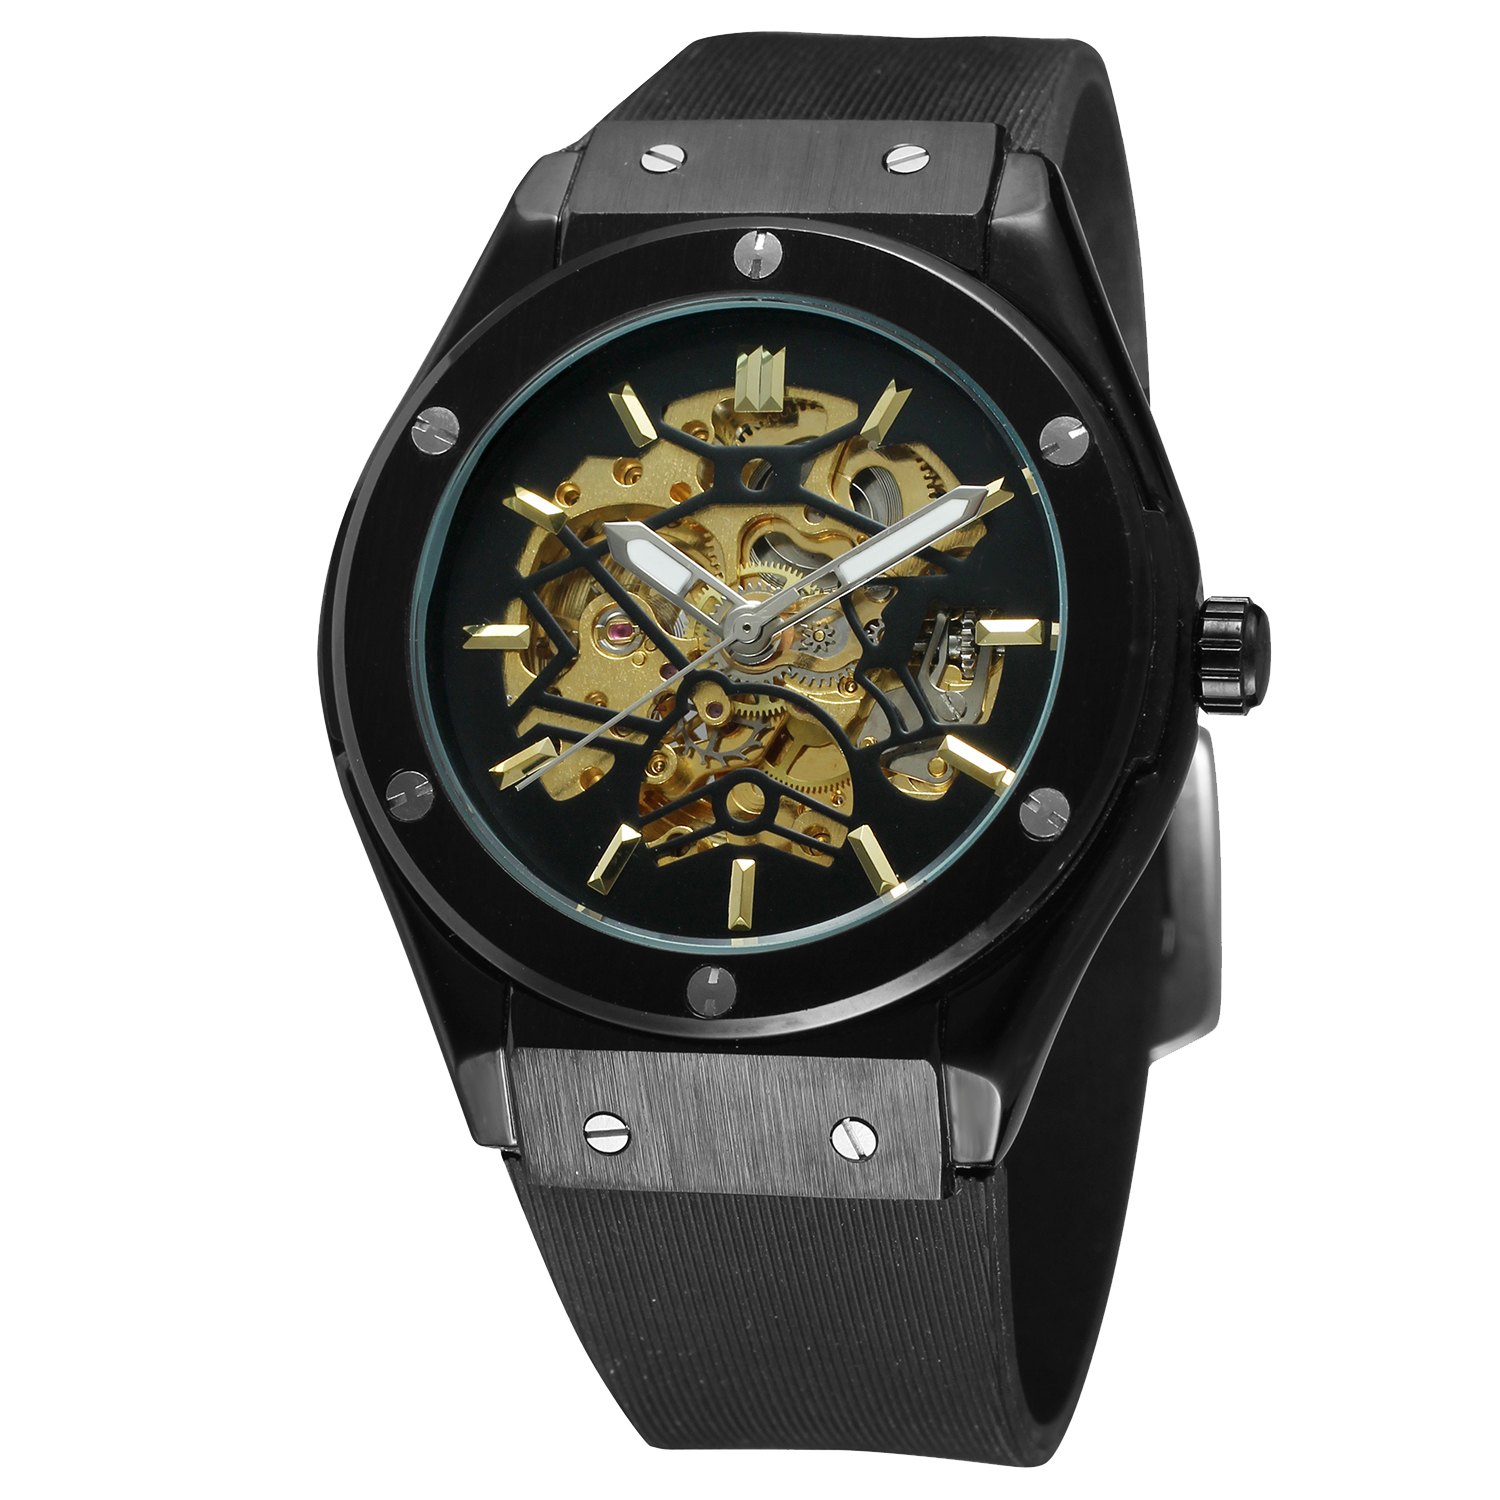 FRS 010 Luxury Mechanical Watches Mens Skeleton Silicone Rubber Strap Wristwatch Military Army Sport Brand Automatic Watch full black@139 QAR